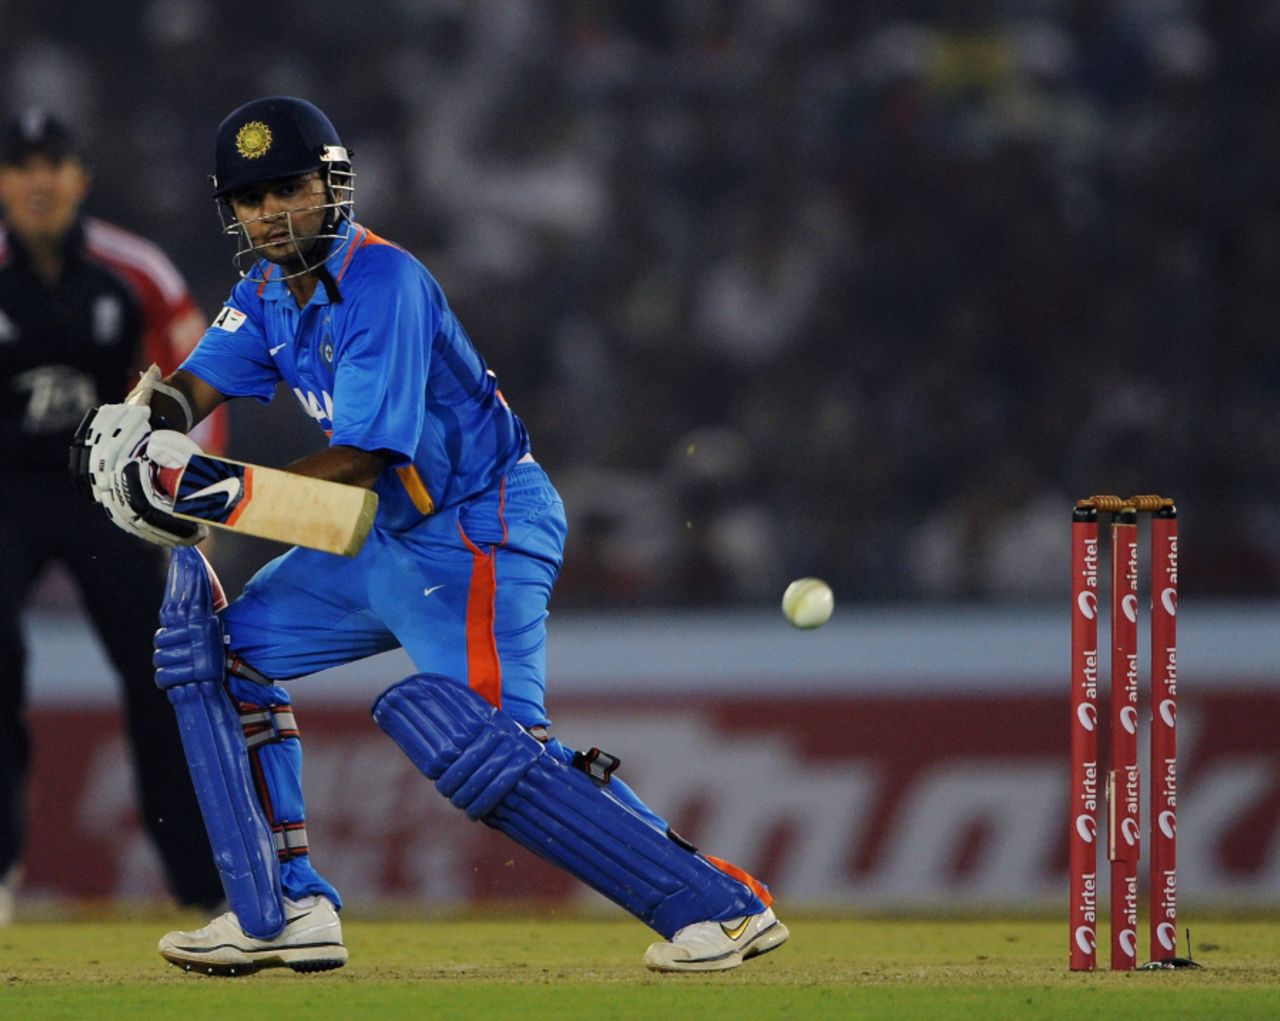 Parthiv Patel helped to put on an opening stand of 79 in India's chase, India v England, 3rd ODI, Mohali, October 20, 2011